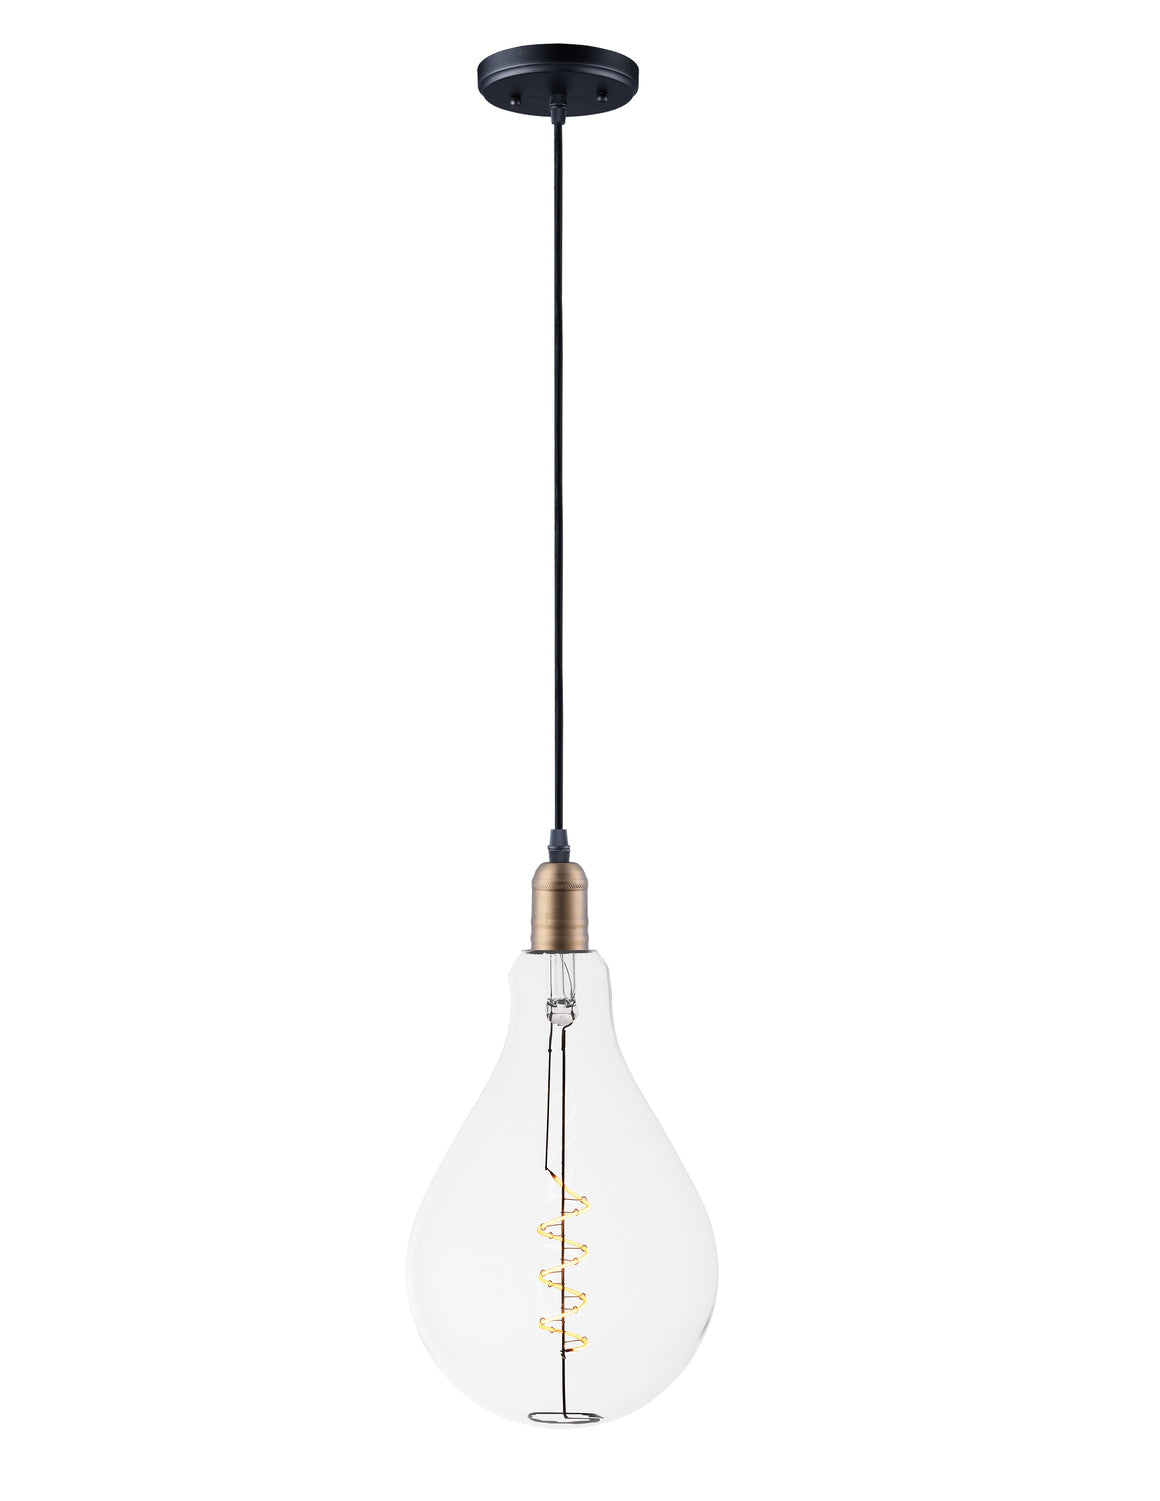 Early Electric 1-Light Pendant with A50 LED Bulb